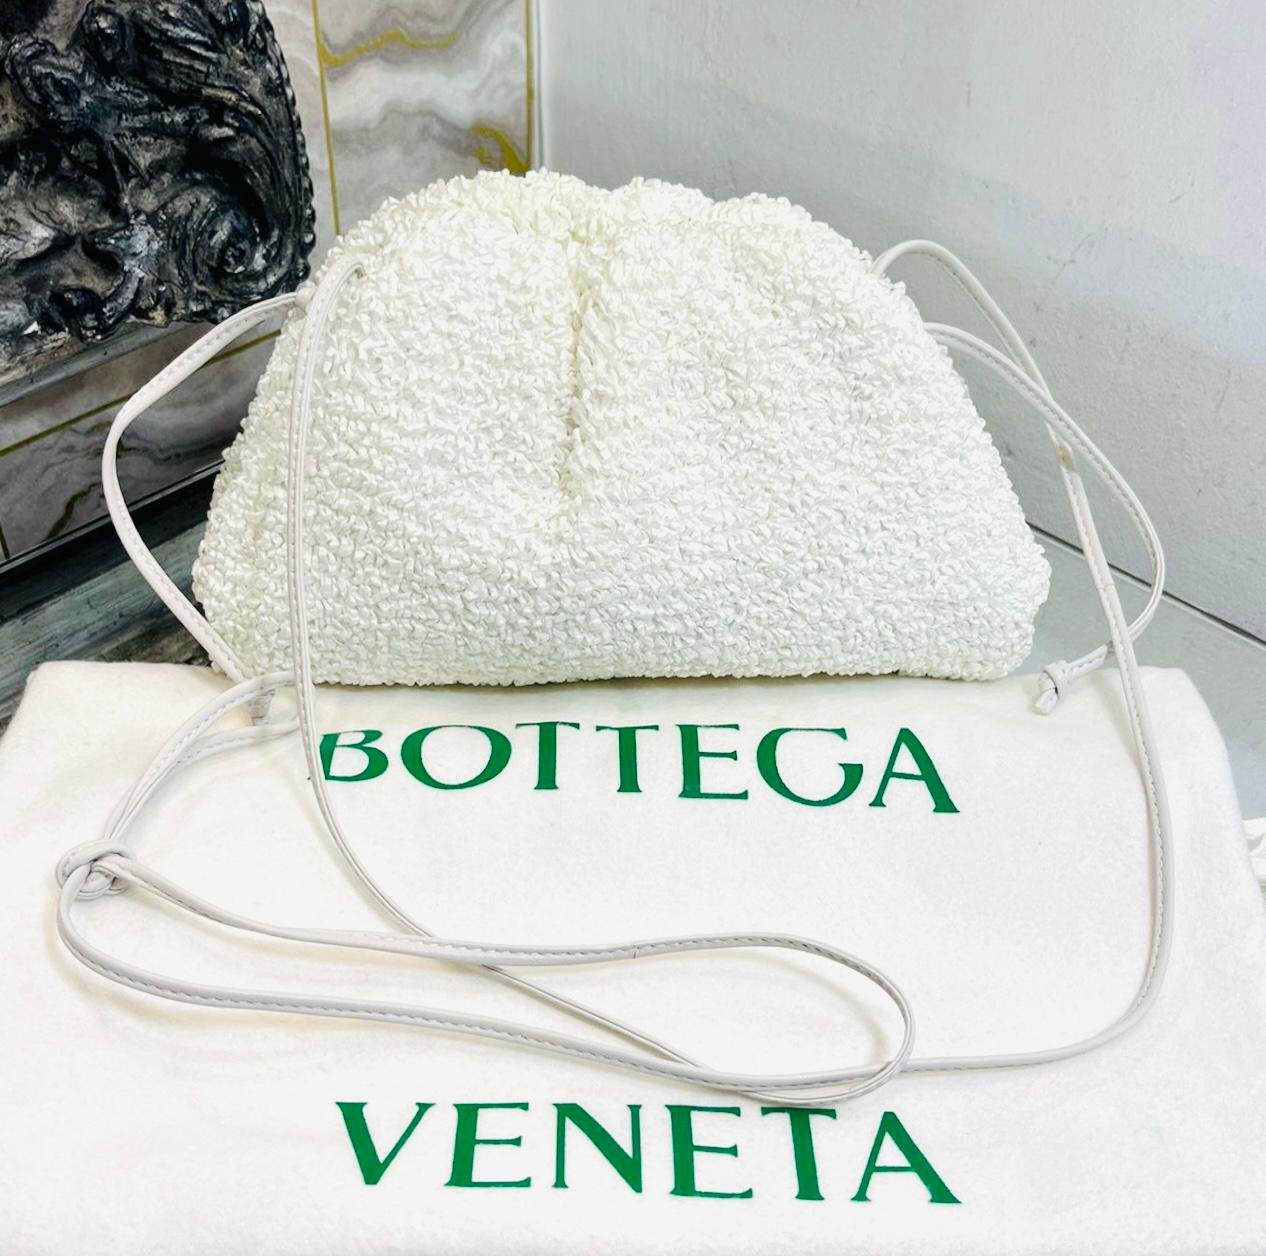 Bottega Veneta Mini Raffia Pouch Clutch Bag

Ivory bag designed with curly-effect leather.

Detailed with long, shoulder strap and top magnetic closure.

Featuring smooth, leather interior. Rrp £2100

Size – Height 15cm, Width 27cm, Depth